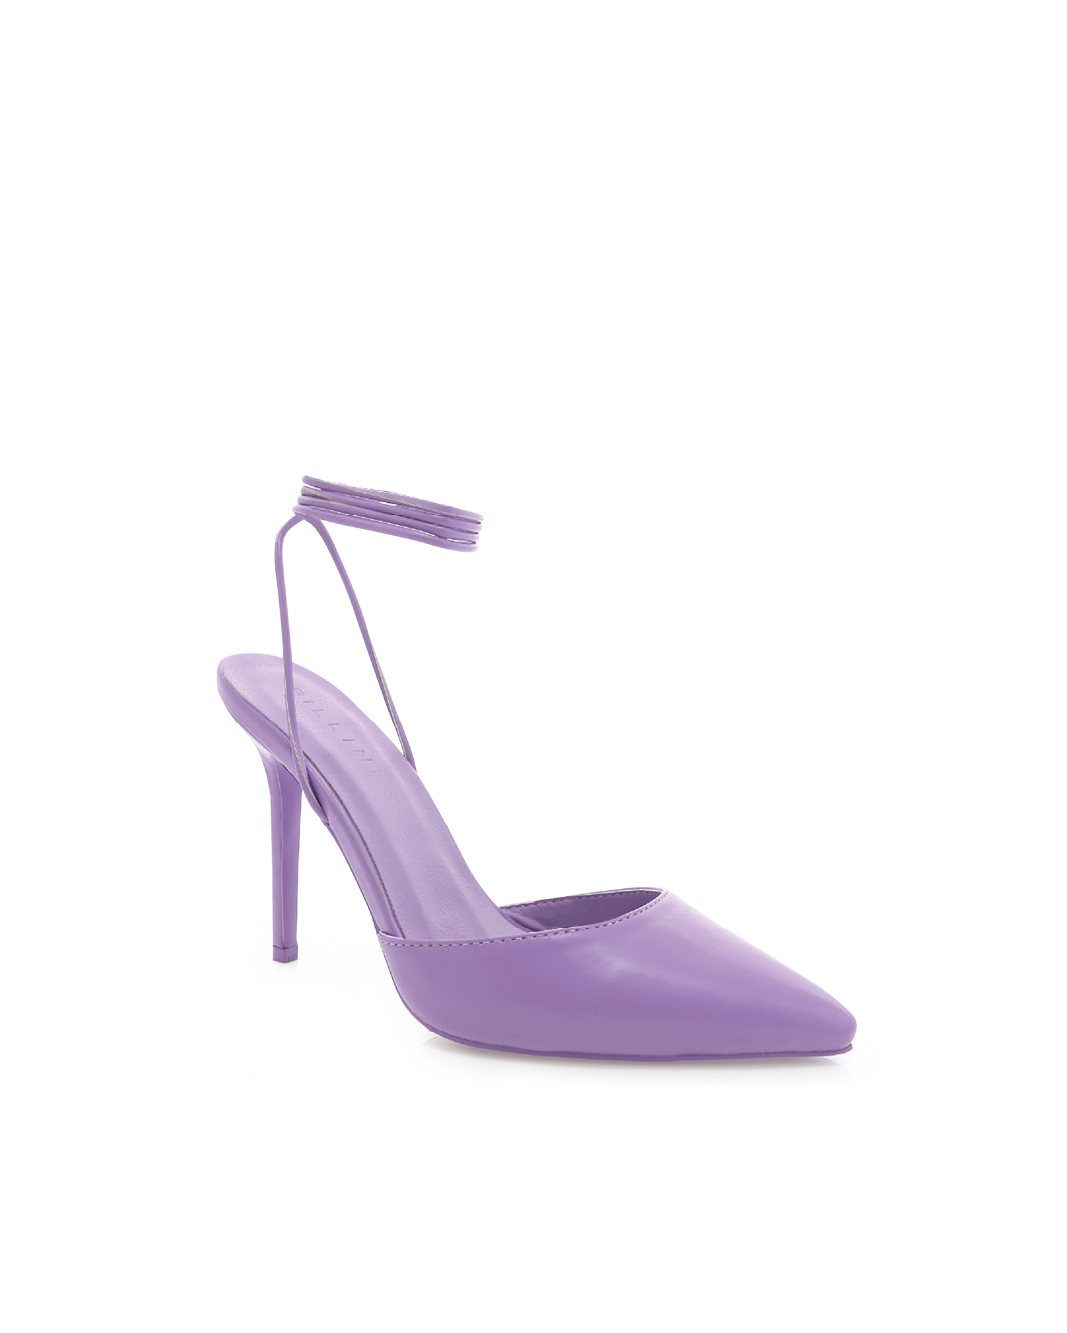 Emma Jones Pointed Toe Stiletto Heels Wedding Engage Party Flowers Sandals  - Lilac Lavender in Sexy Heels & Platforms - $79.10